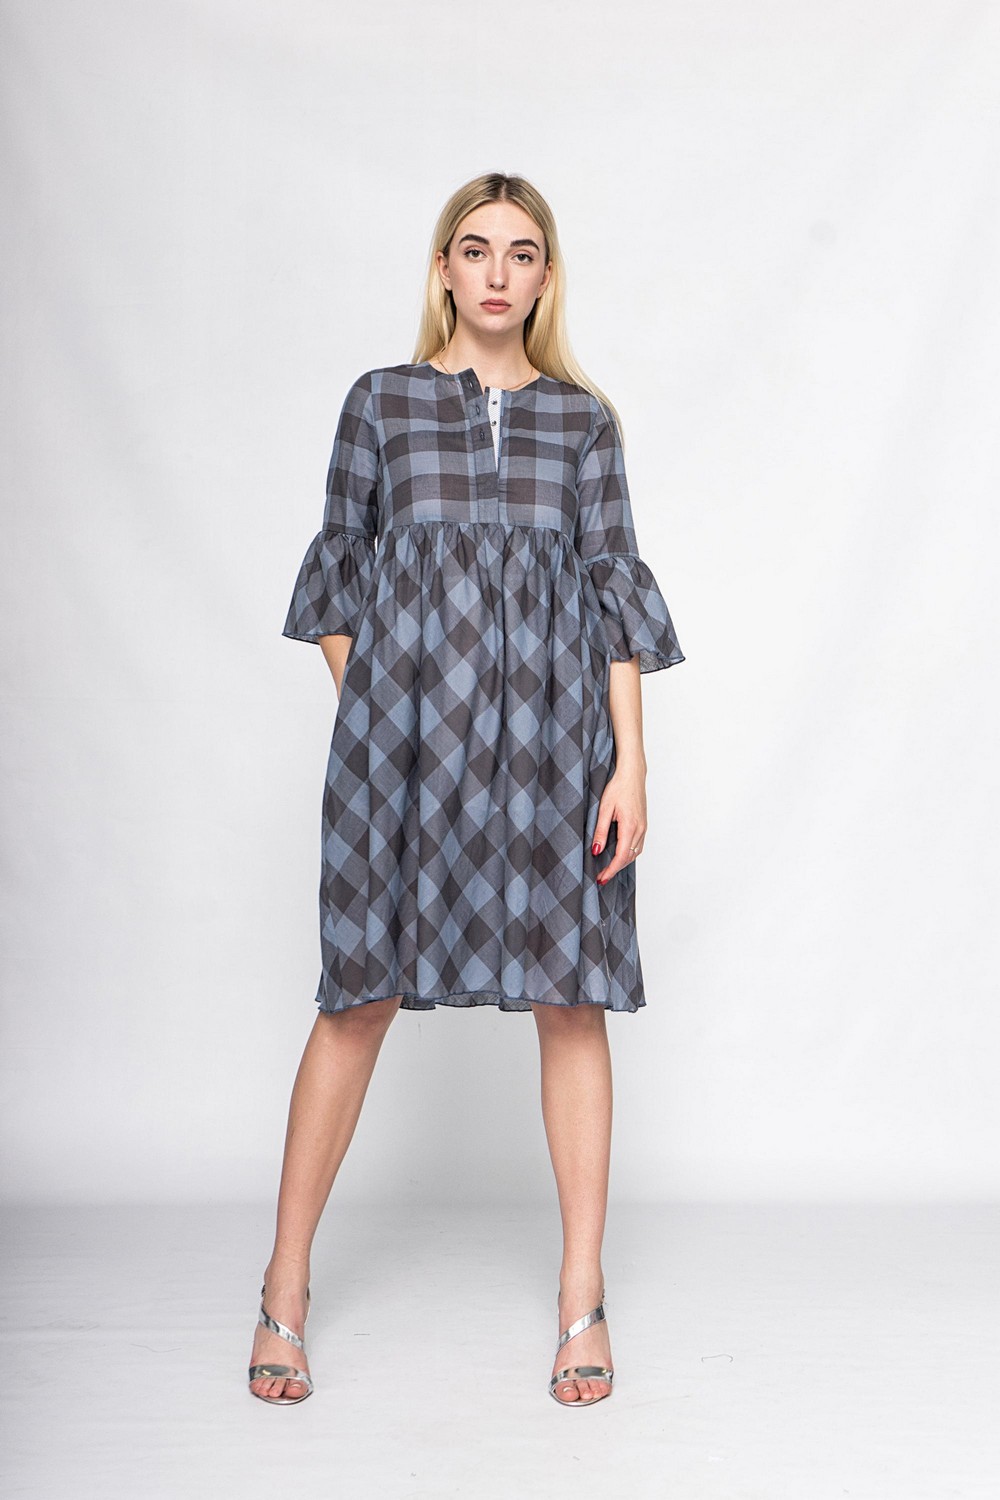 Buy Cotton loose checkered women dress, Сomfortable casual ladies dress for summer